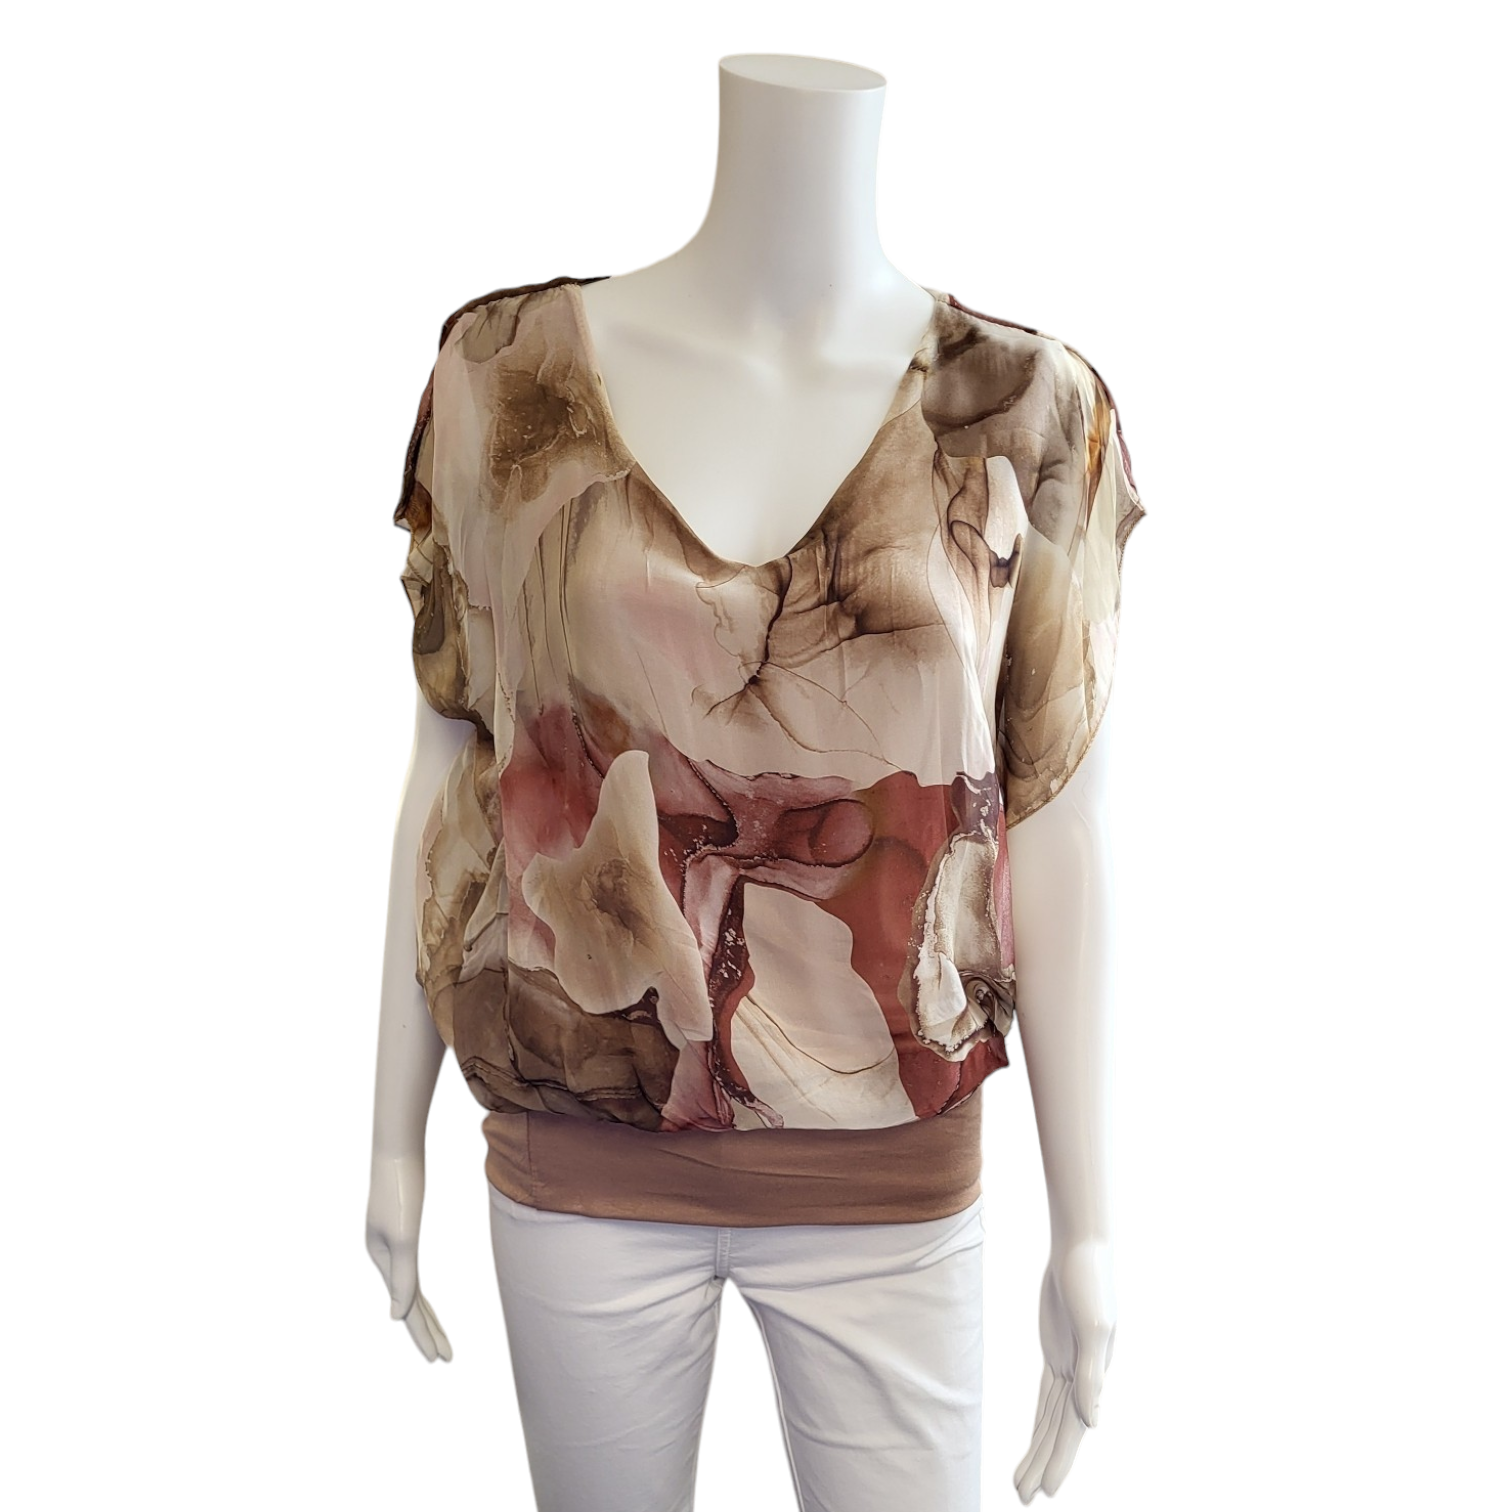 silky v neck top with short sleeves and a v neck. abstract design in brown and cream/beige